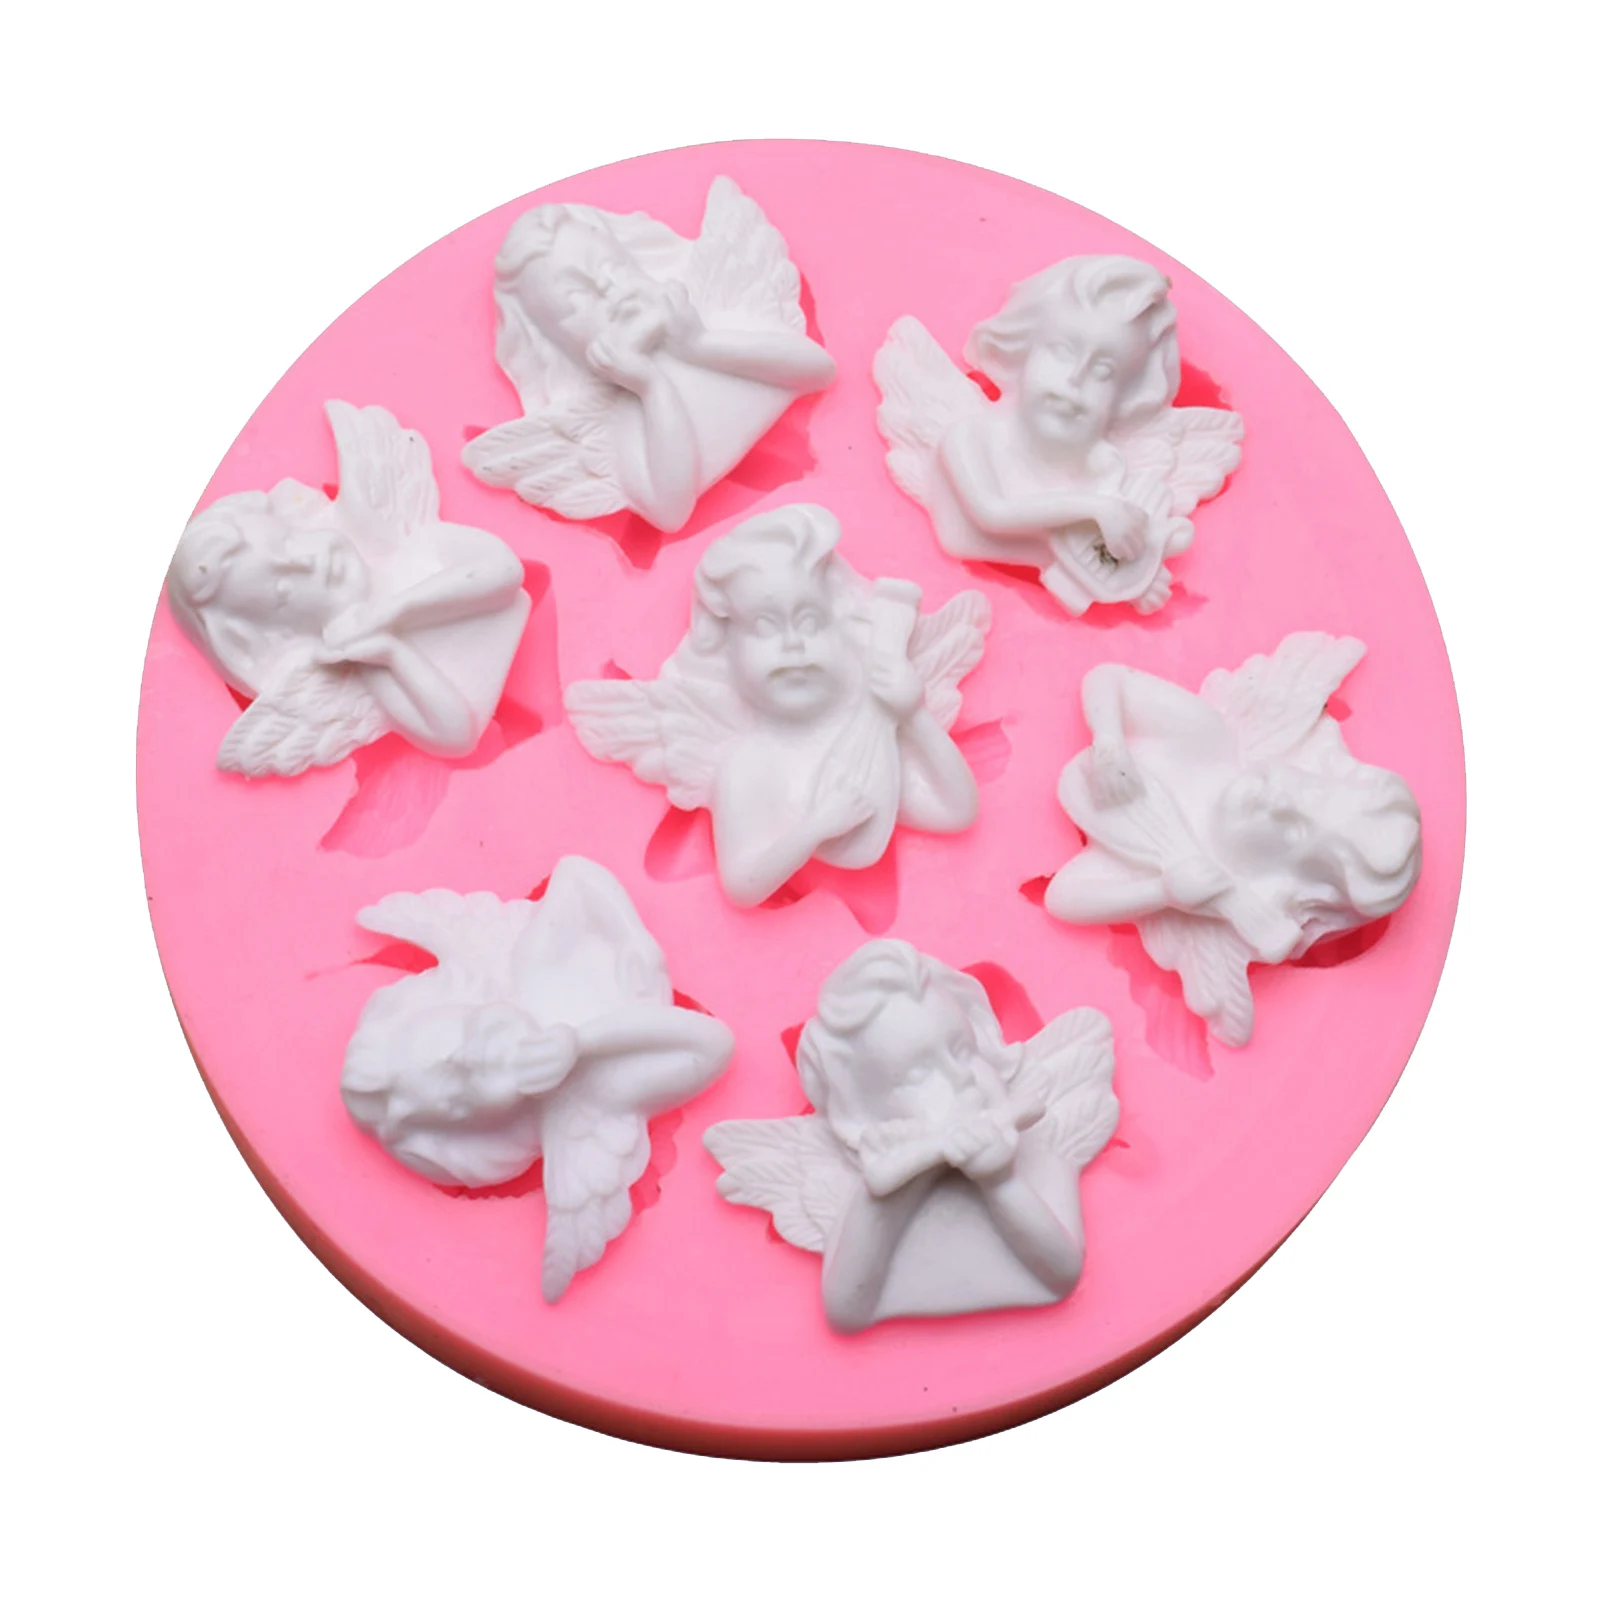 

DIY Baking Mold Angel Baby Different Shapes Silicone Mold Diy Baking Cake Jewelry Epoxy Mold Decorating Tools CH